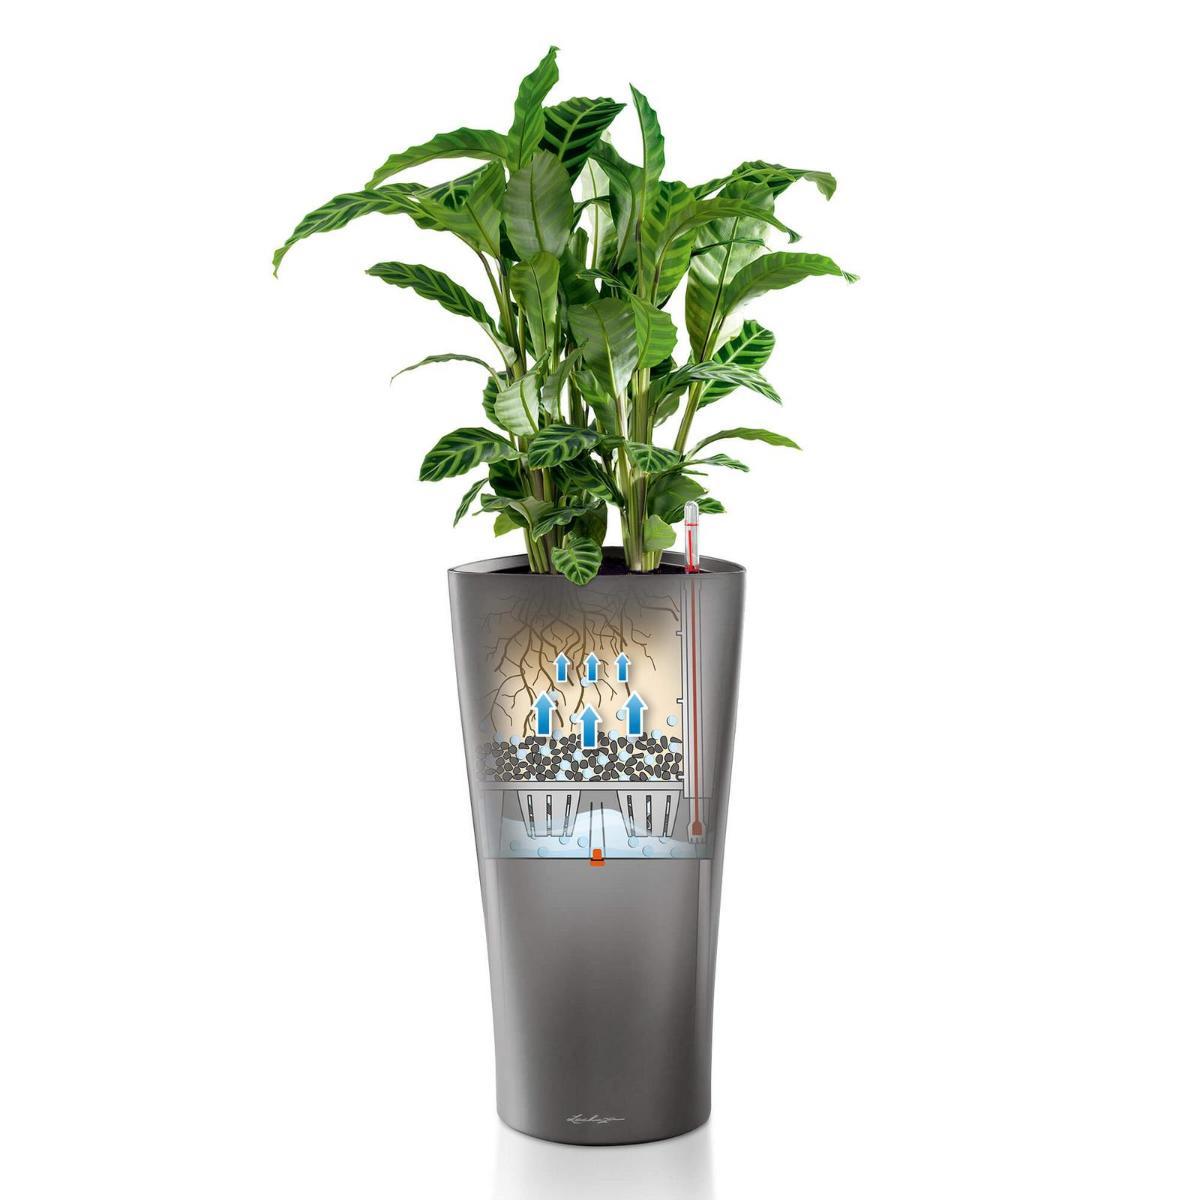 LECHUZA DELTA 30 Charcoal Poly Resin Floor Self-watering Planter with Substrate and Water Level Indicator D30 H56 cm, 40L - citiplants.com